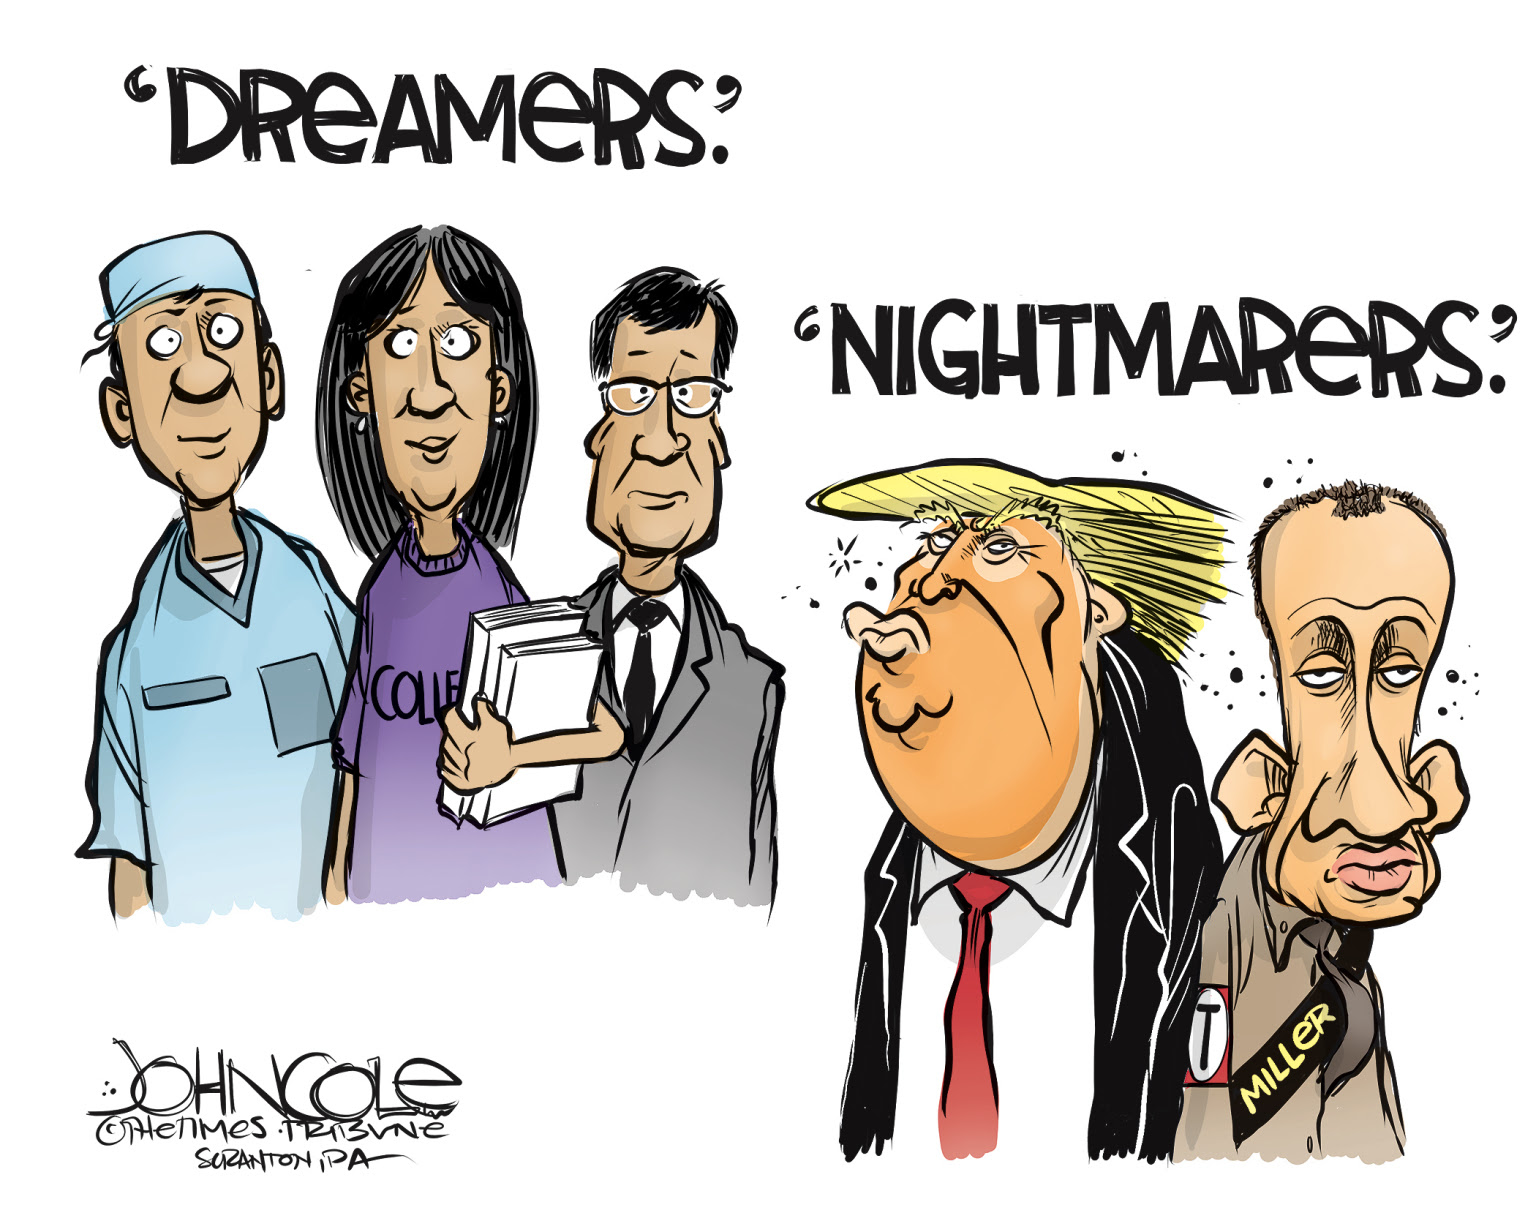 Trump Republicans. Democrats fight to protect Dreamers from Republican led attacks to deport millions of DACA recipients